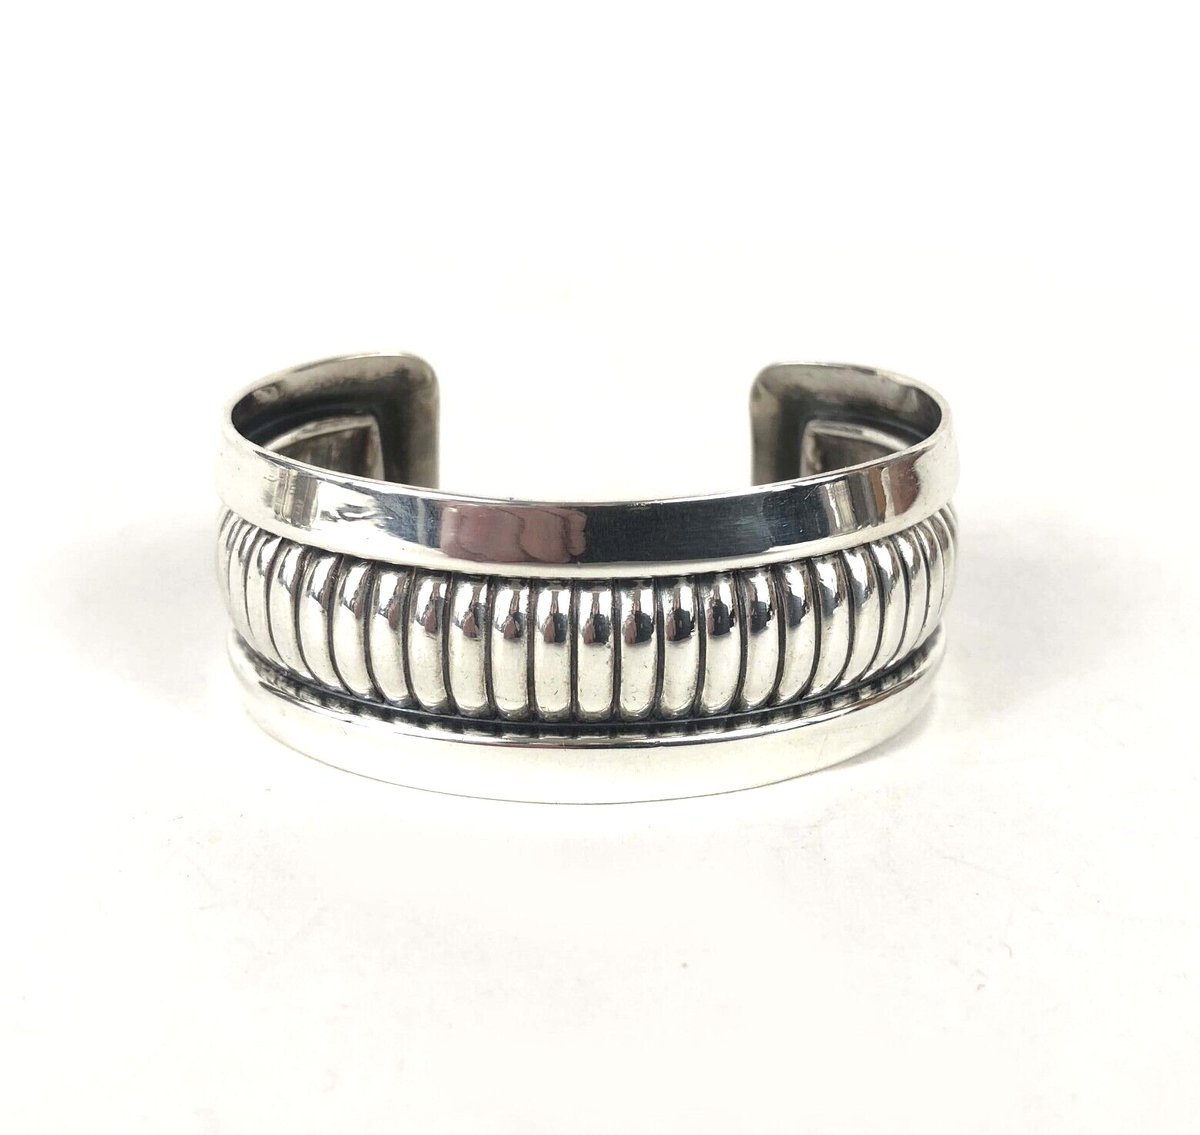 Check out Southwestern Style Statement Sterling Silver 925 Cuff Bracelet Pre-Owned Estate ebay.com/itm/4041675941…

#southwesternjewelry #sterlingcuff #cuffbracelets #sterlingjewelry #estatejewelry #preownedjewelry #tribaljewelry #roguesestatejewelry